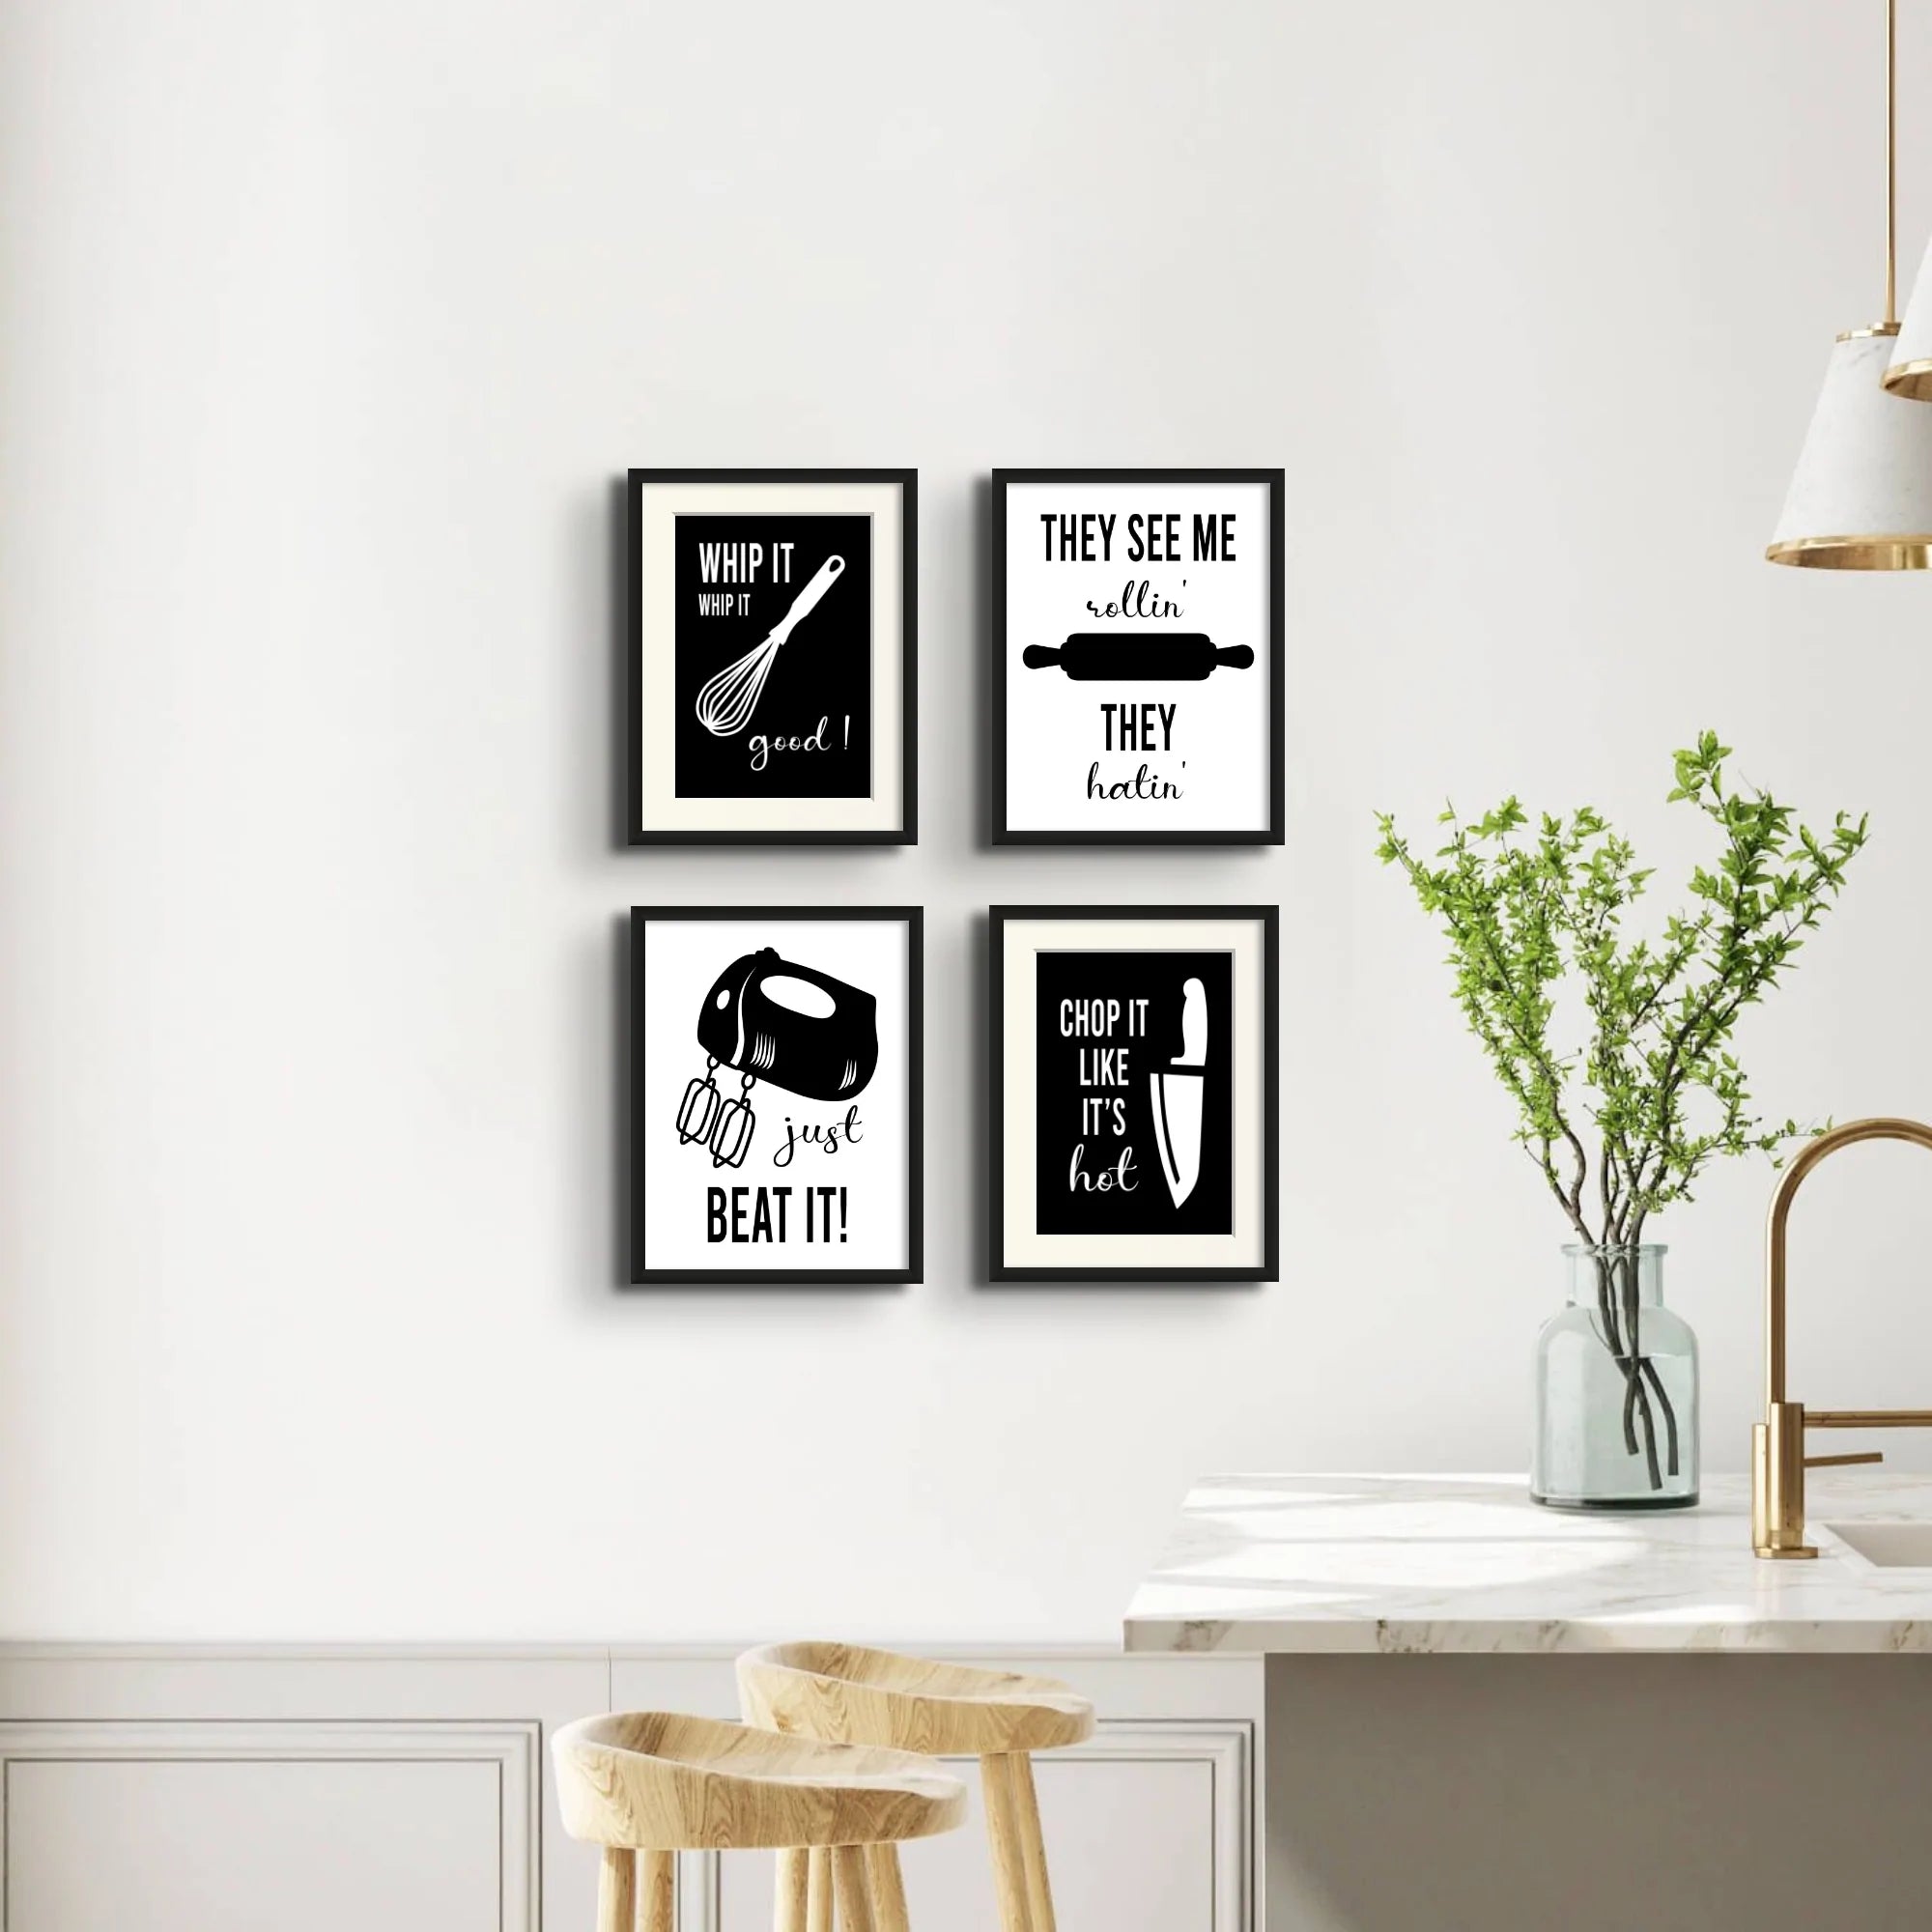 KITCHEN AESTHETIC WALL GALLERY SET